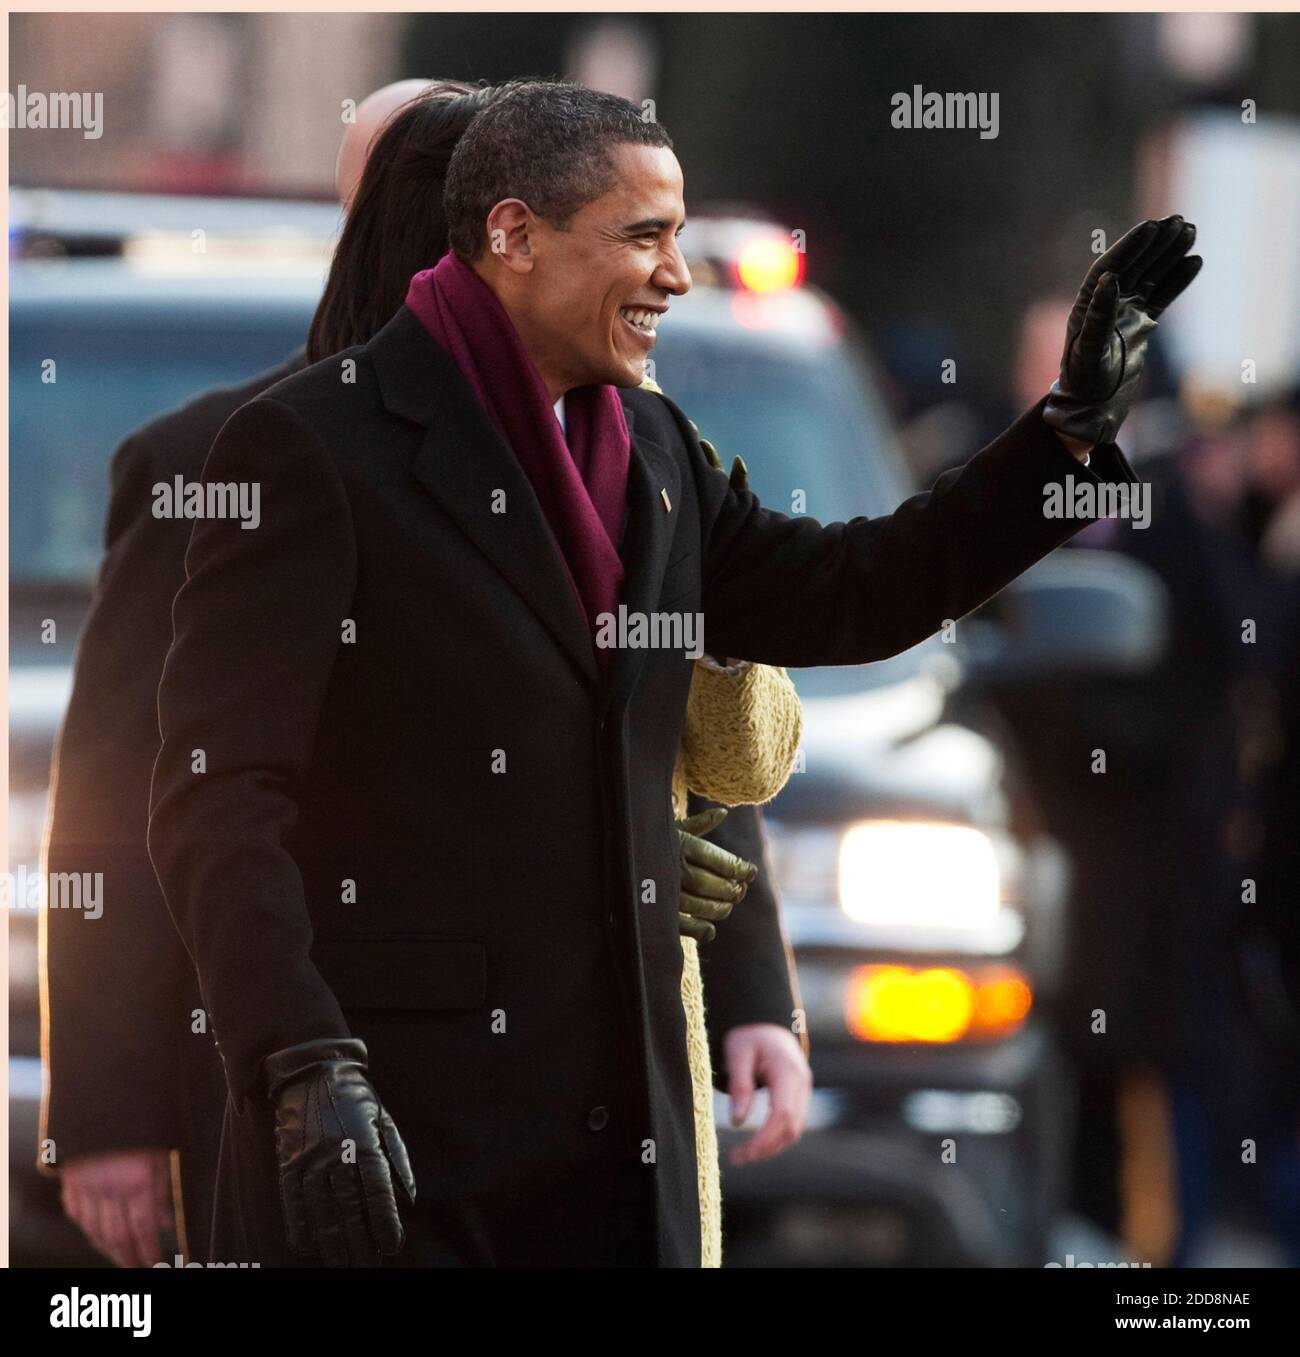 NO FILM, NO VIDEO, NO TV, NO DOCUMENTARY - President Barack Obama and wife Michelle walk along the parade route after he was sworn in as the 44th US President in Washington, D.C., USA, on January 20, 2009. Photo by George Bridges/MCT/ABACAPRESS.COM Stock Photo